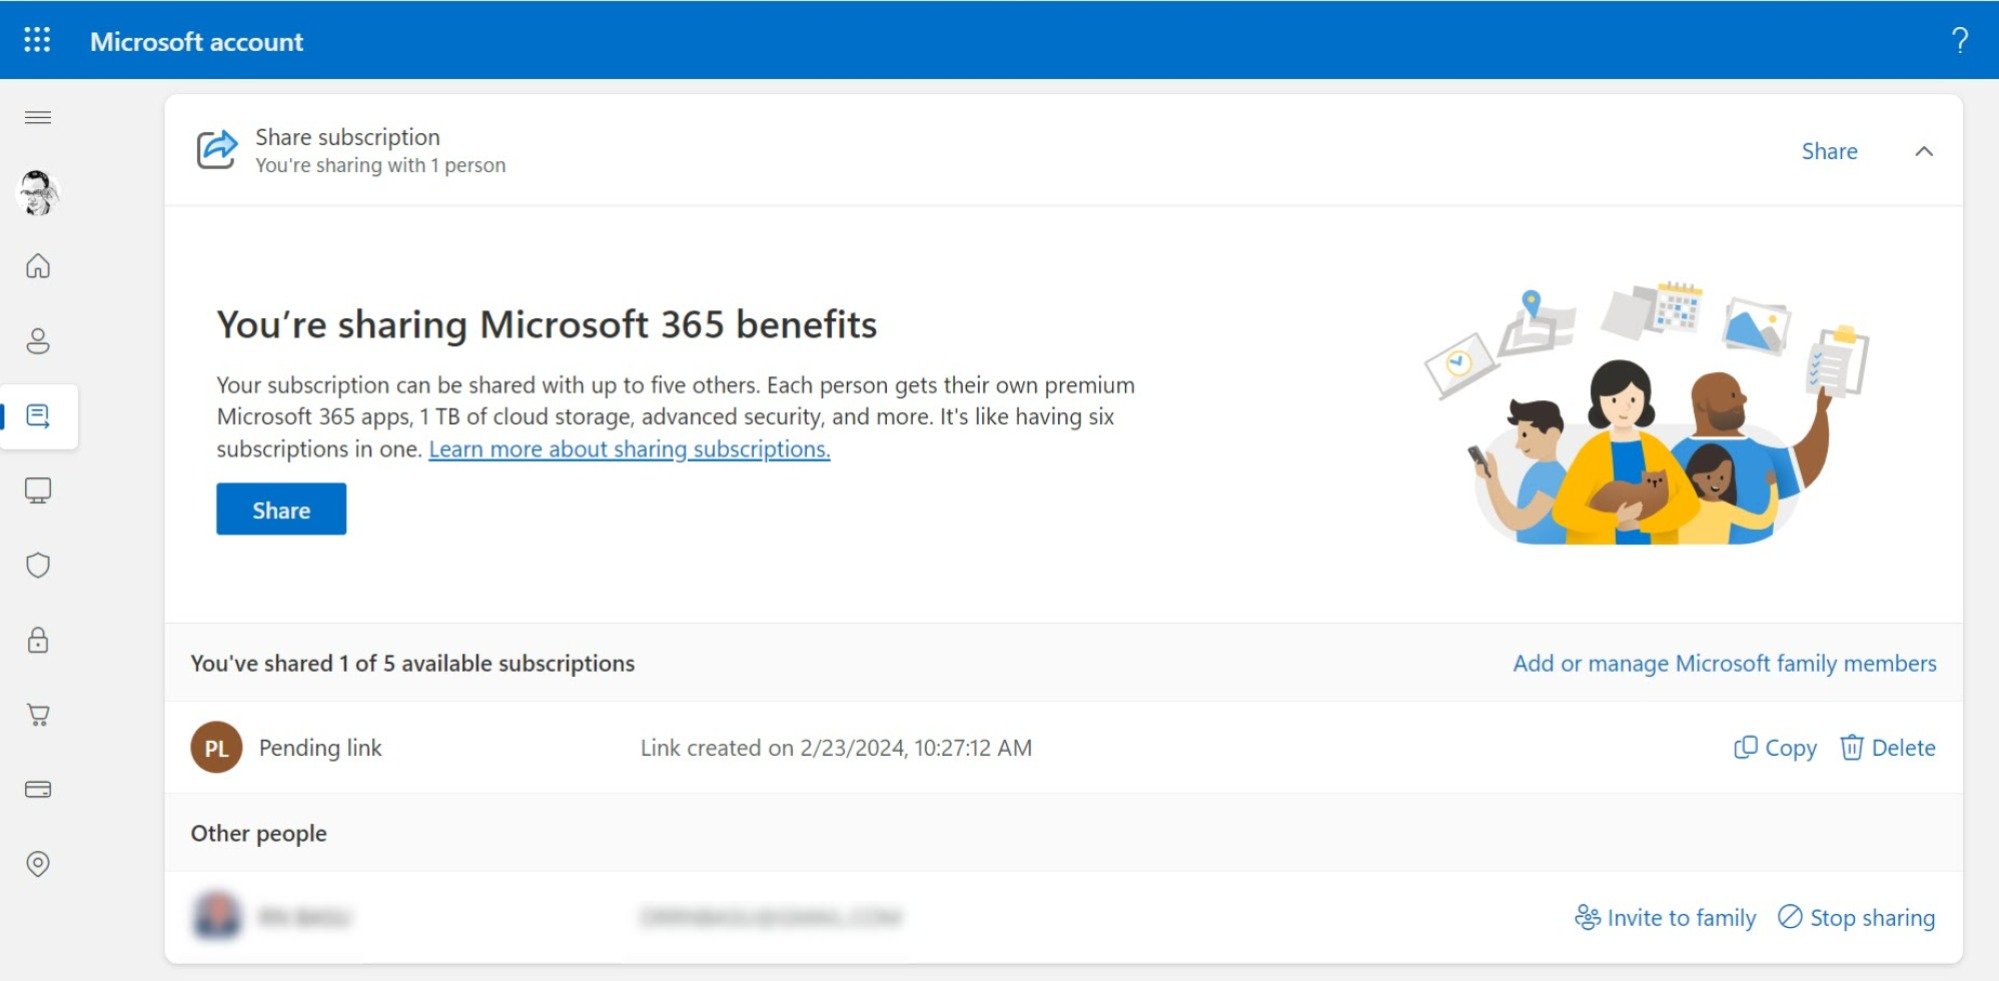 Manage sharing in Microsoft 365 Family